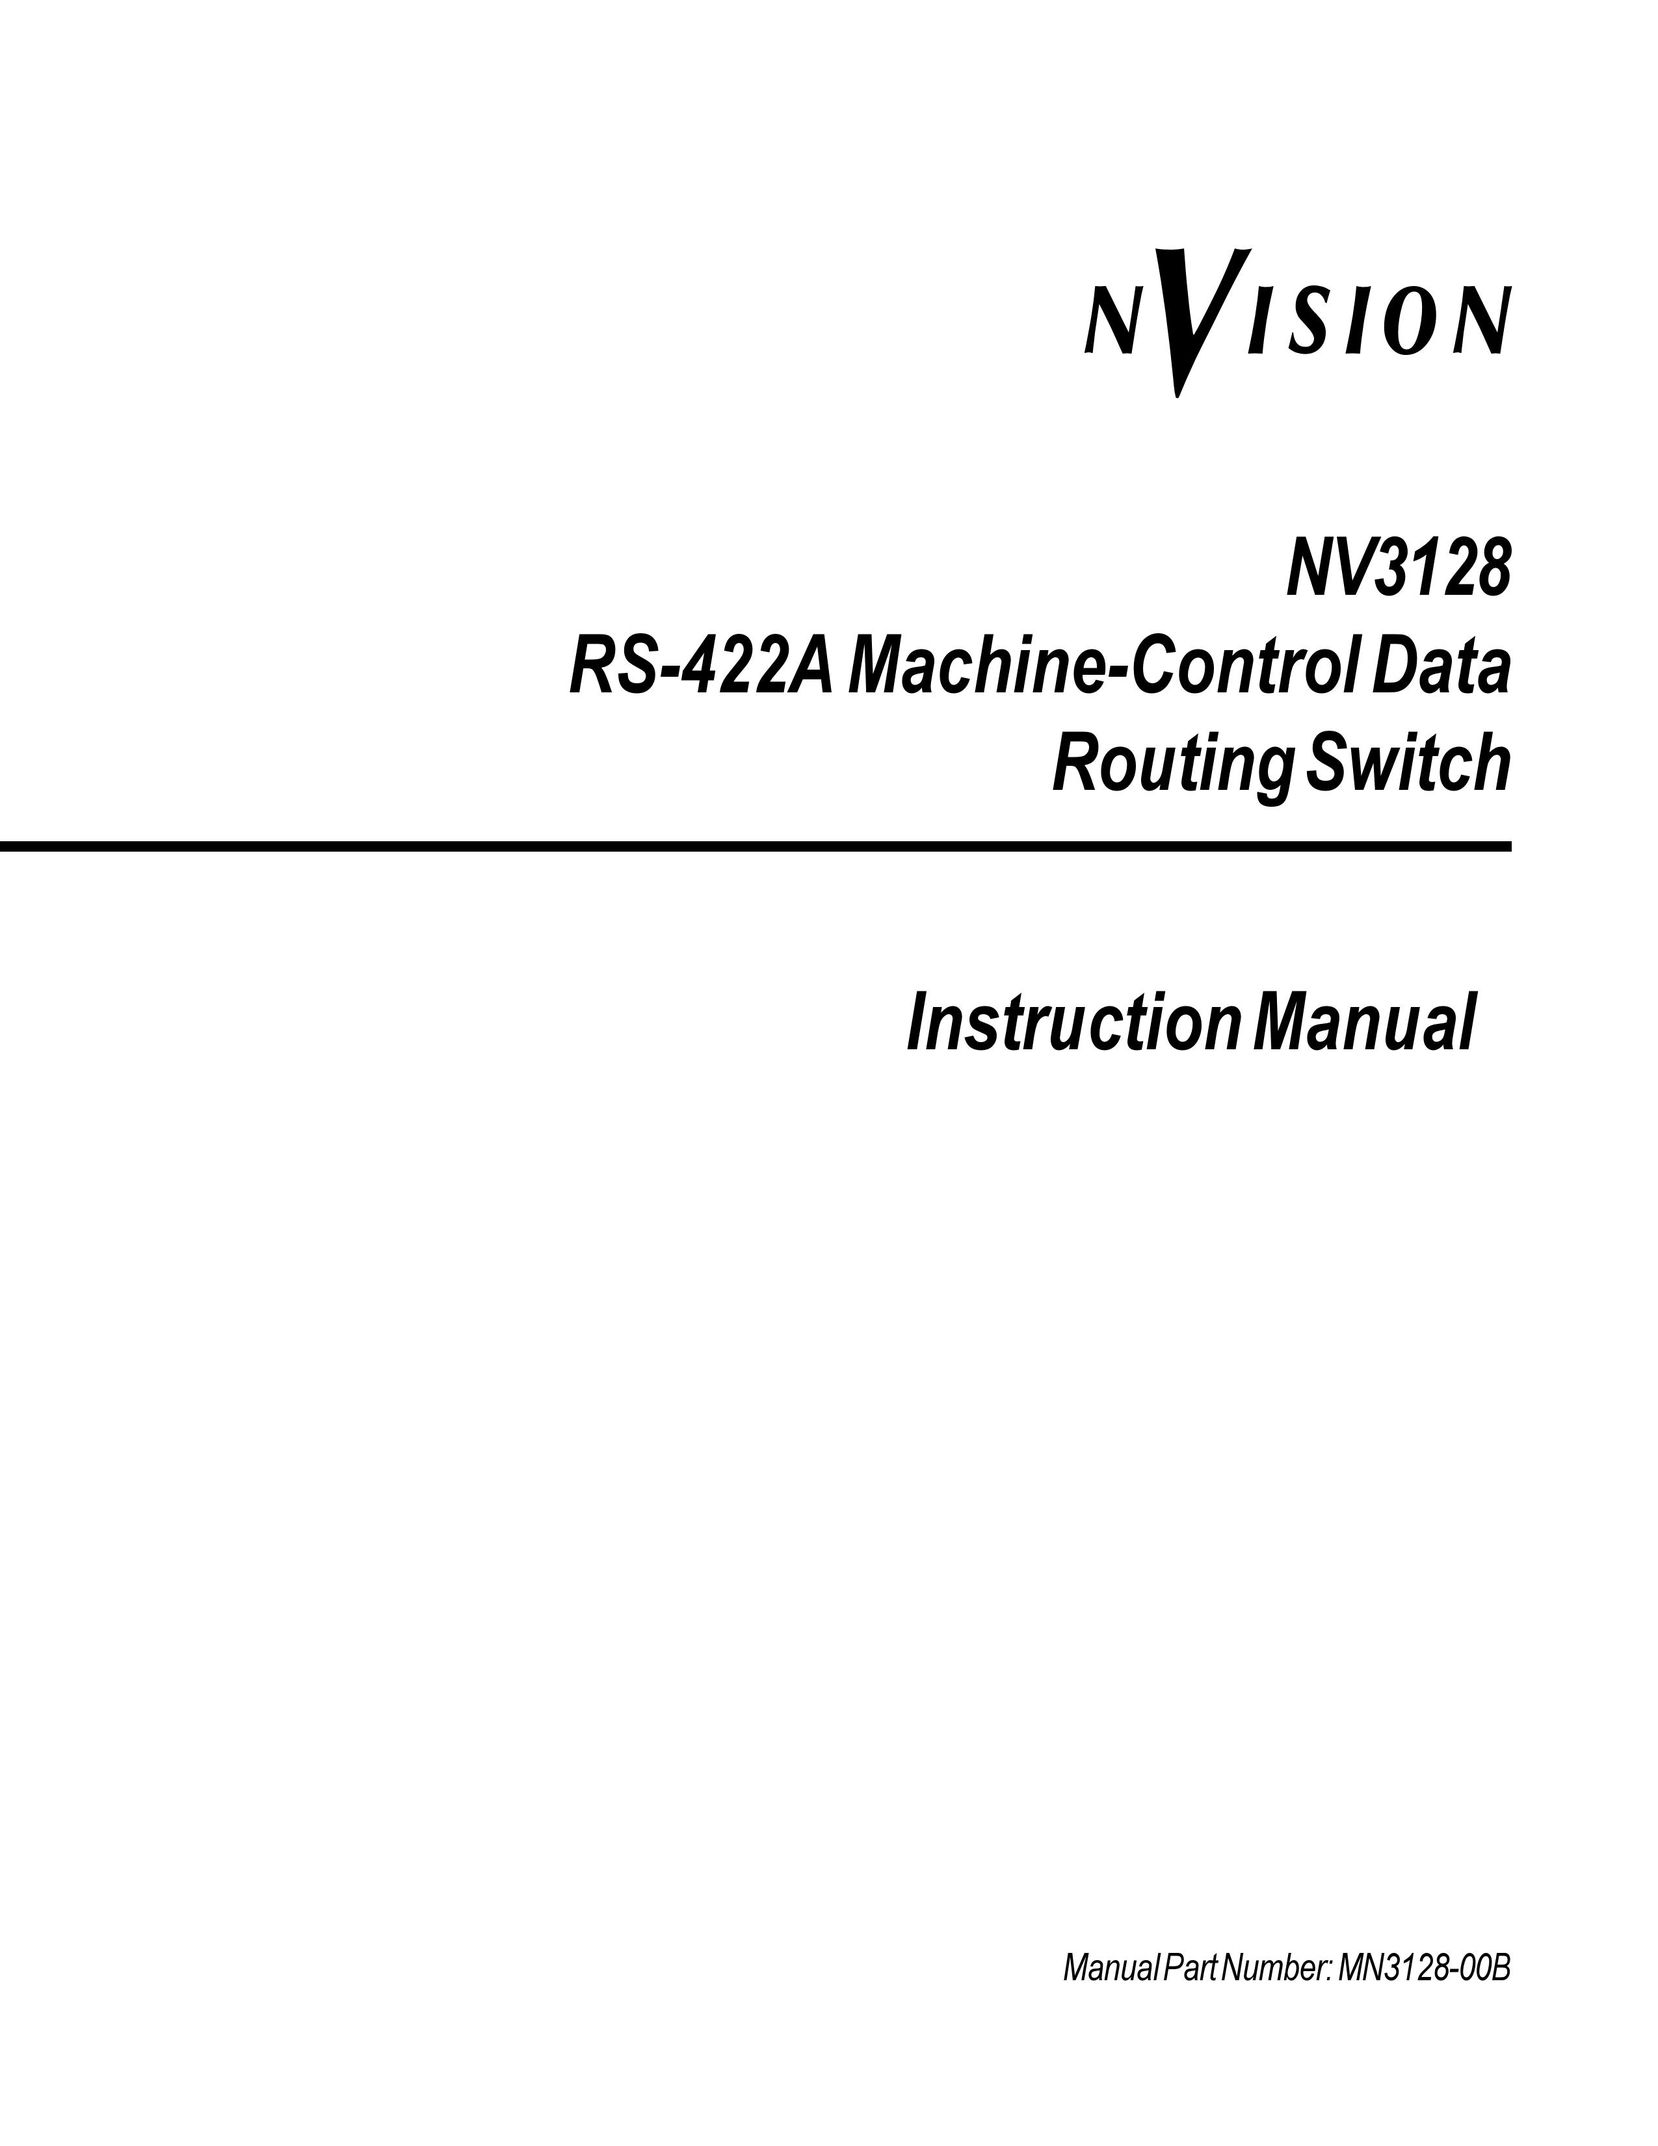 Envision Peripherals NV3128 Network Router User Manual